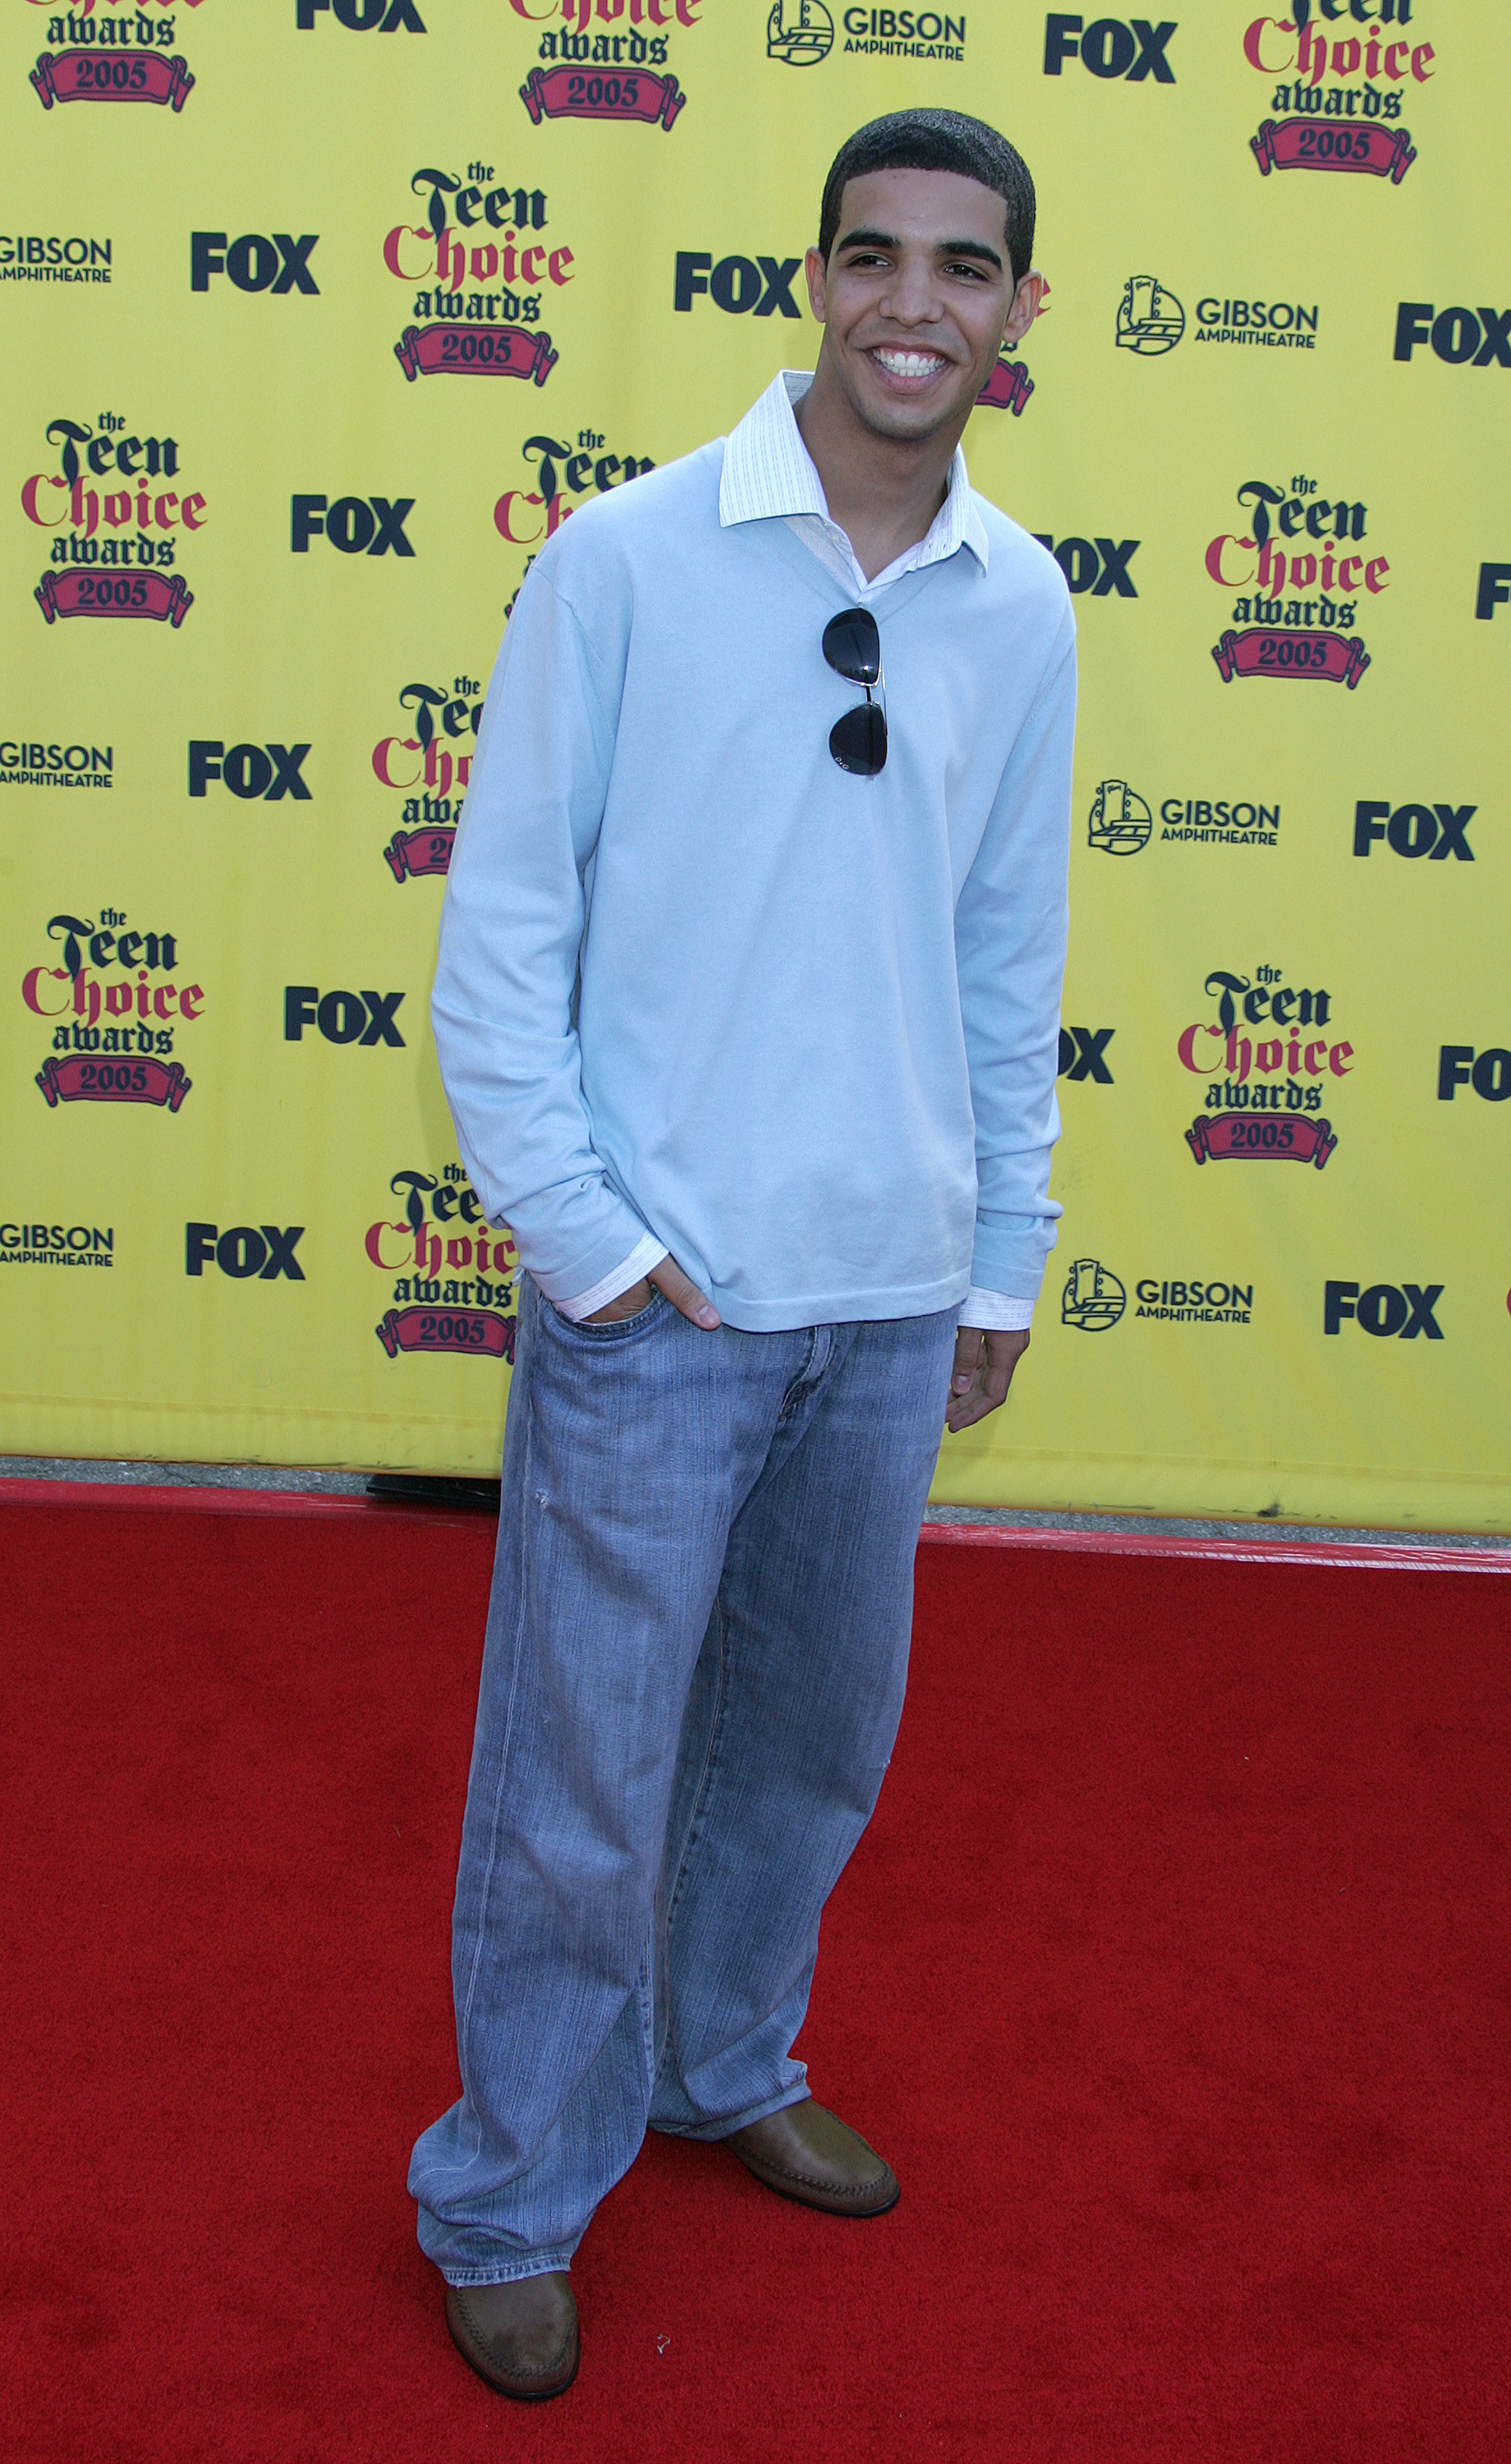 on the red carpet in jeans and polo shirt